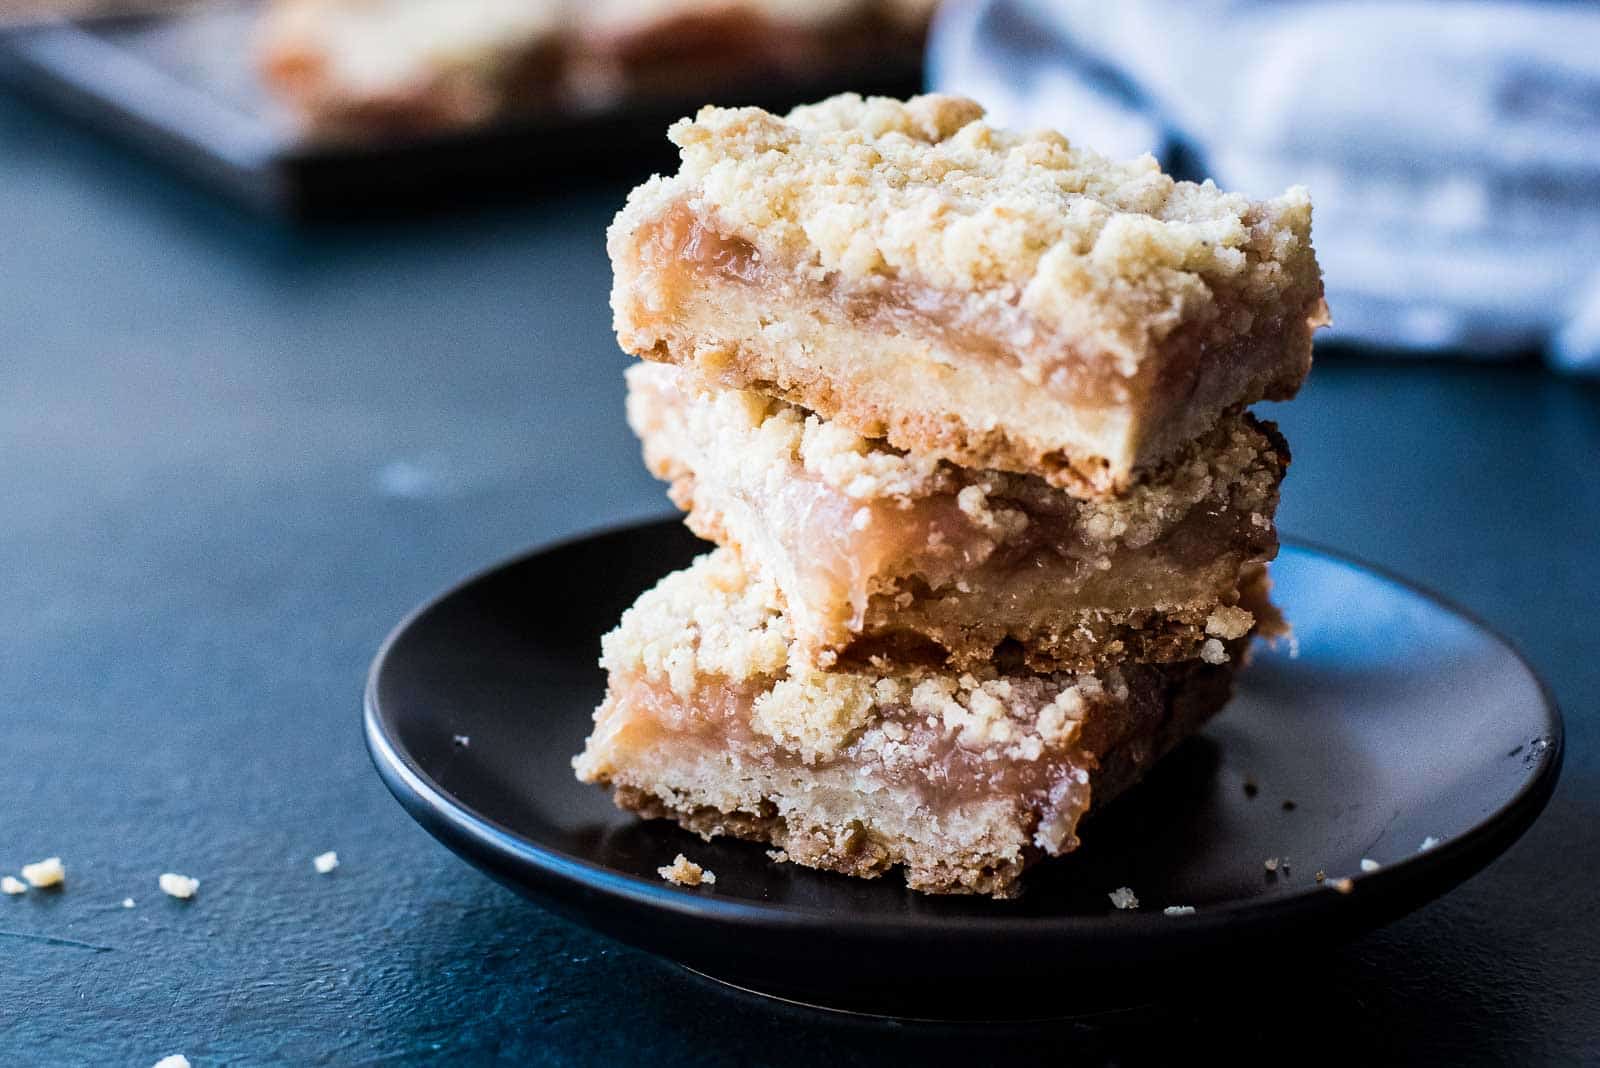 A stack of three peach crumble bars on a black plate.